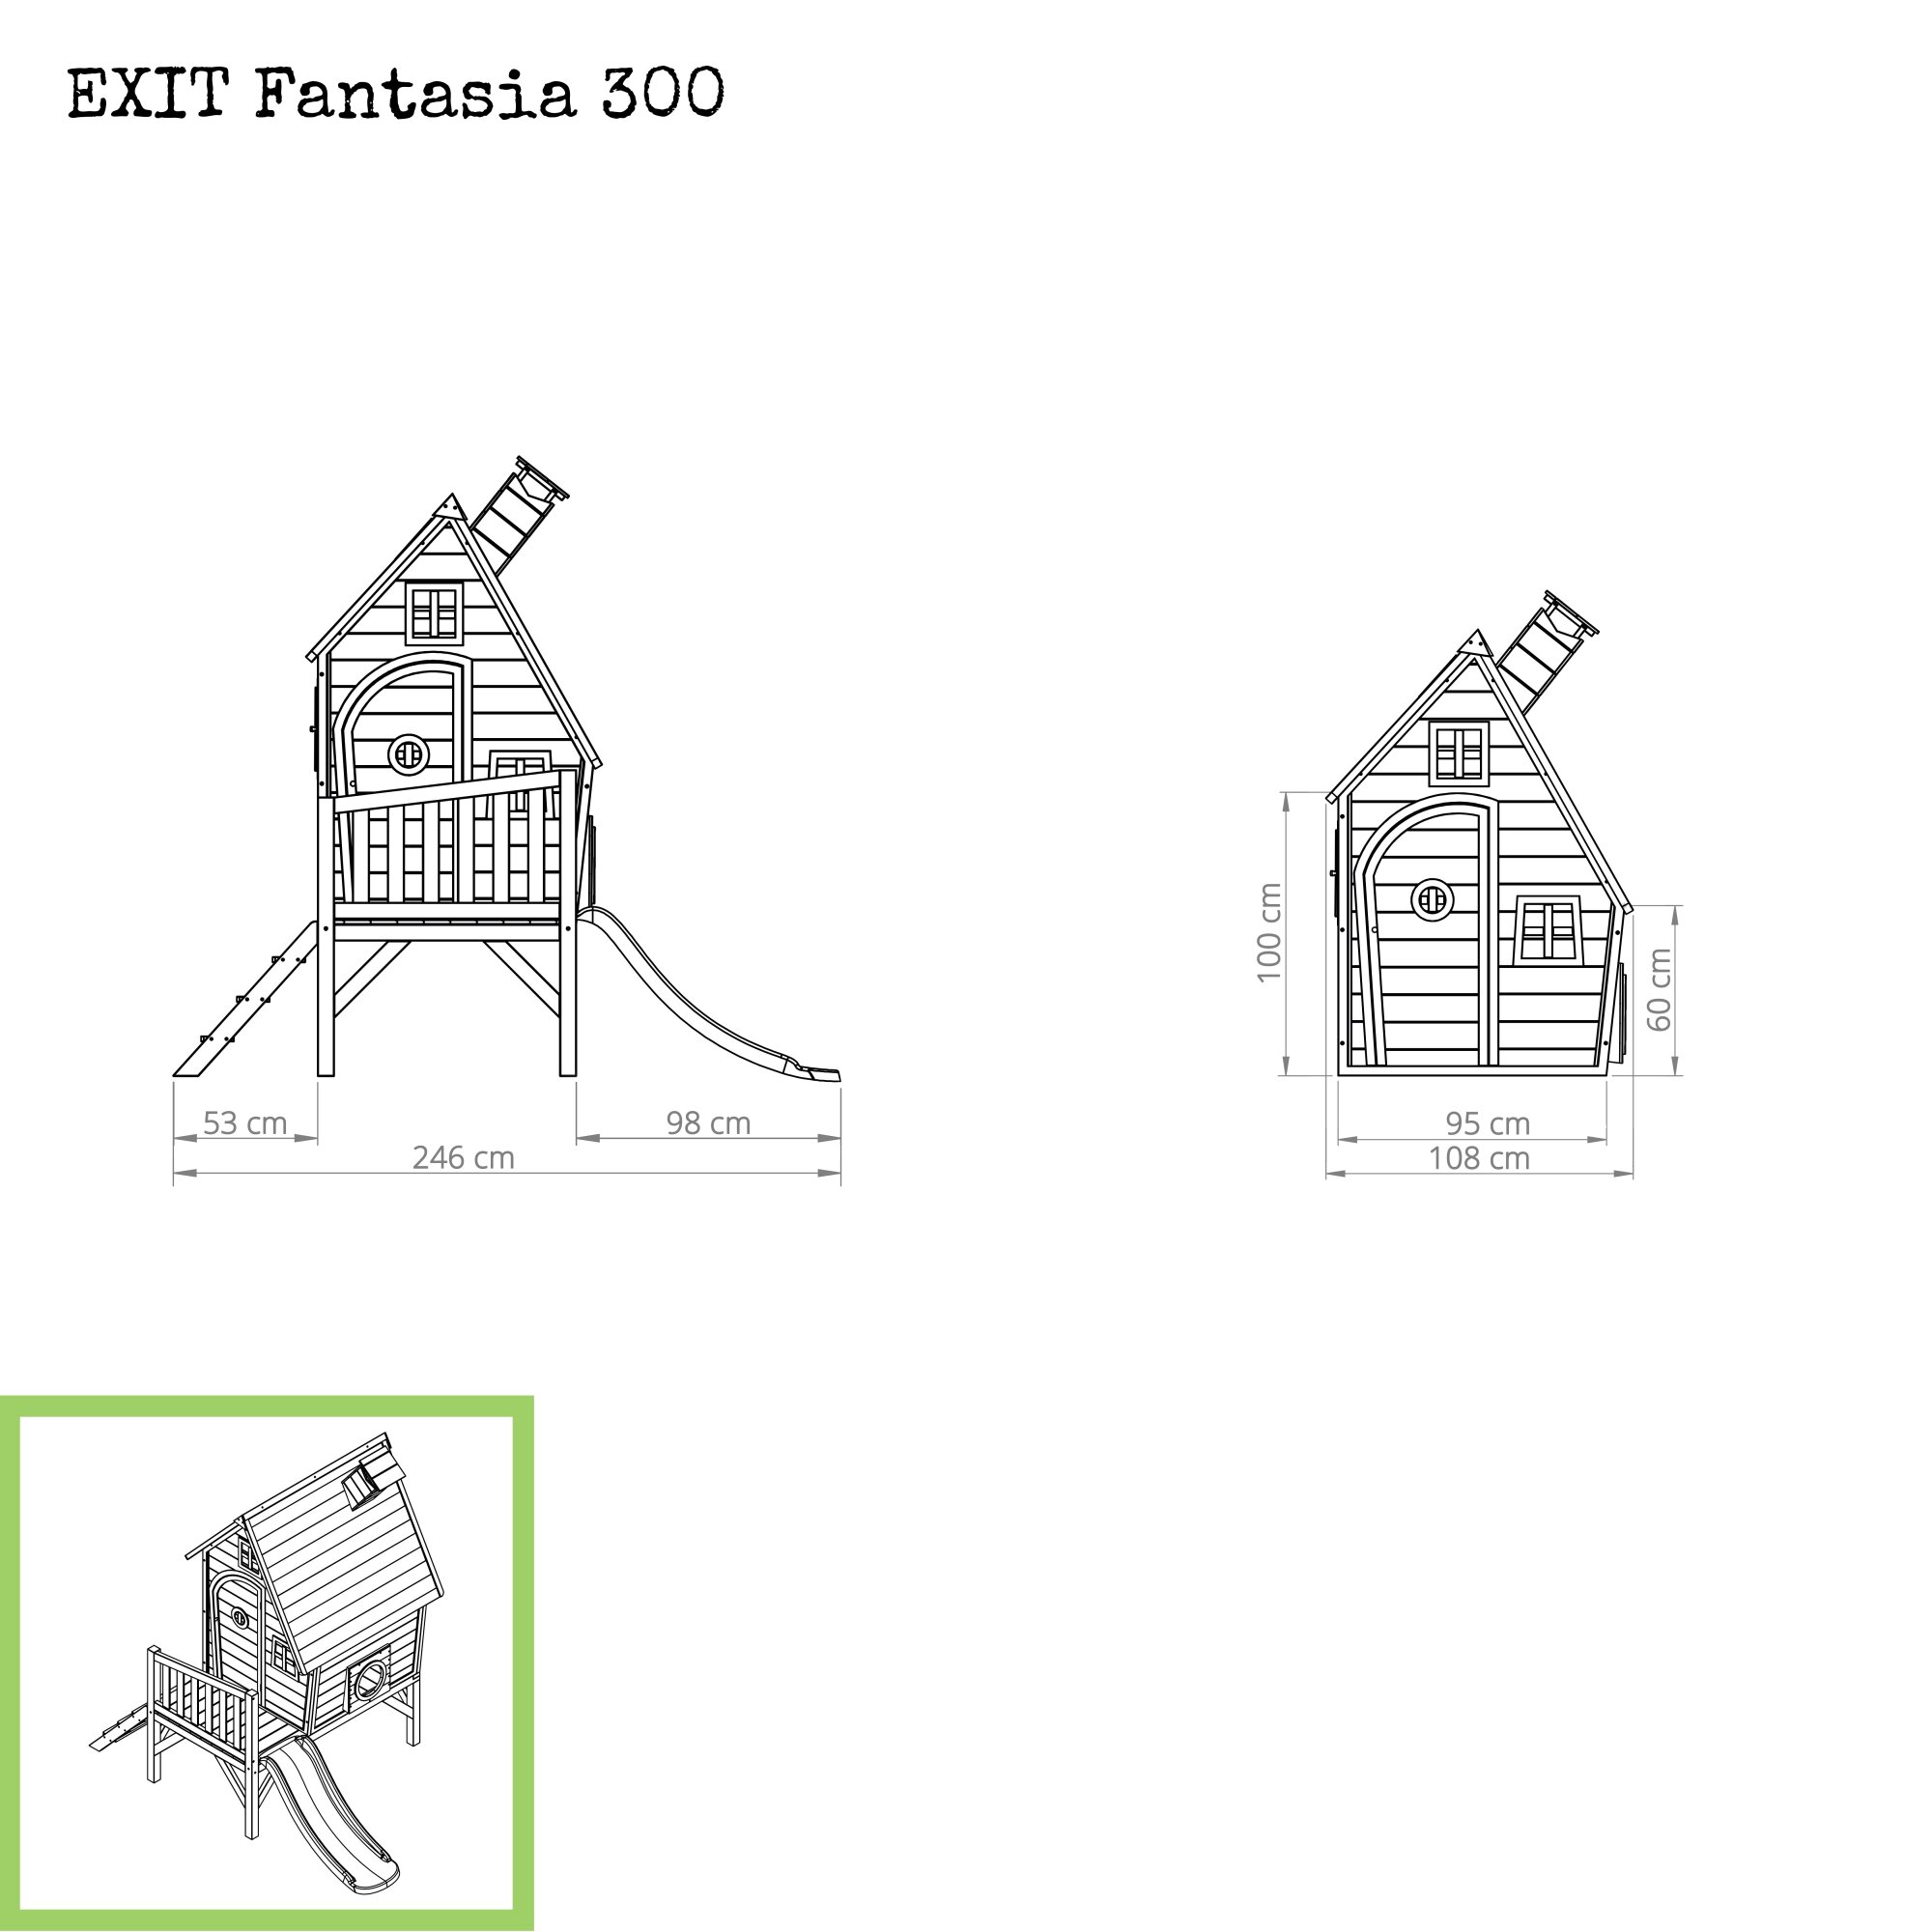 EXIT Fantasia 300 wooden playhouse - red